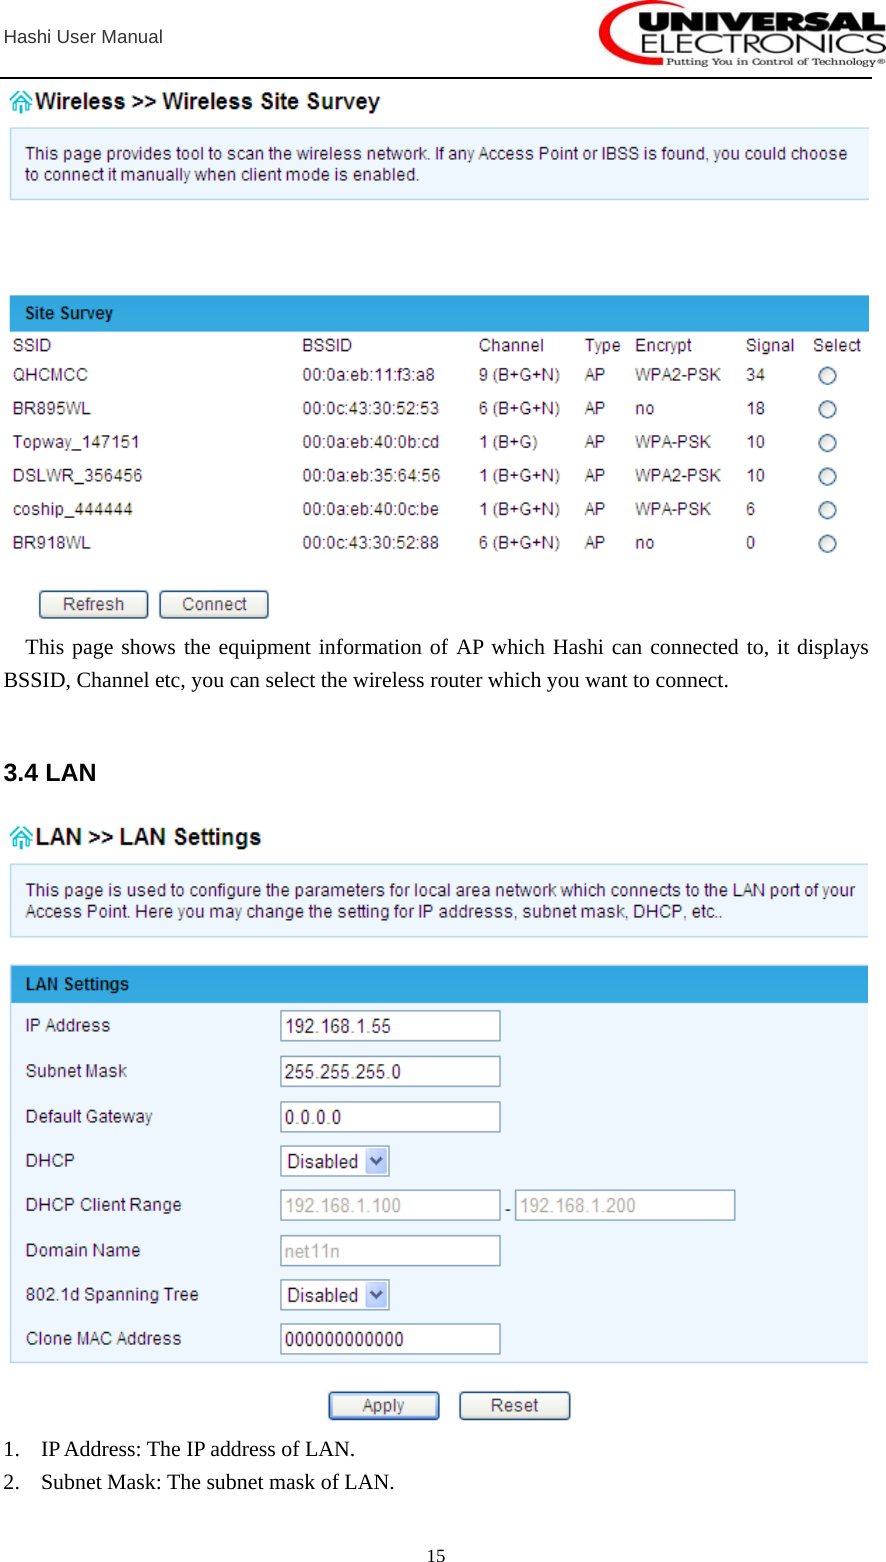  Hashi User Manual  15 This page shows the equipment information of AP which Hashi can connected to, it displays BSSID, Channel etc, you can select the wireless router which you want to connect.  3.4 LAN  1. IP Address: The IP address of LAN. 2. Subnet Mask: The subnet mask of LAN. 